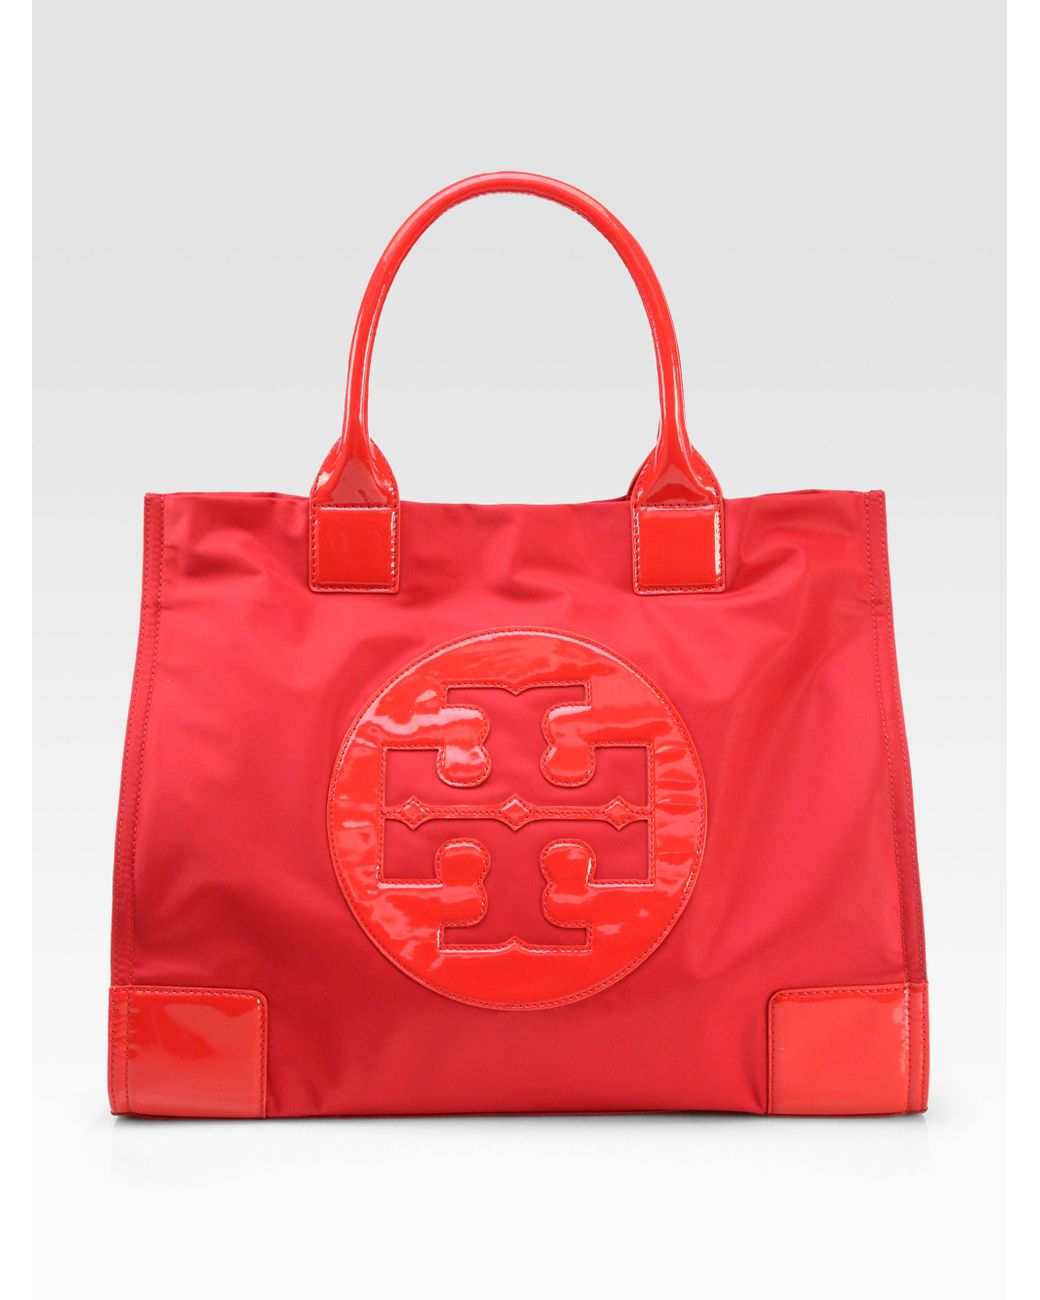 Tory Burch Ella Nylon & Faux Leather Tote in Red